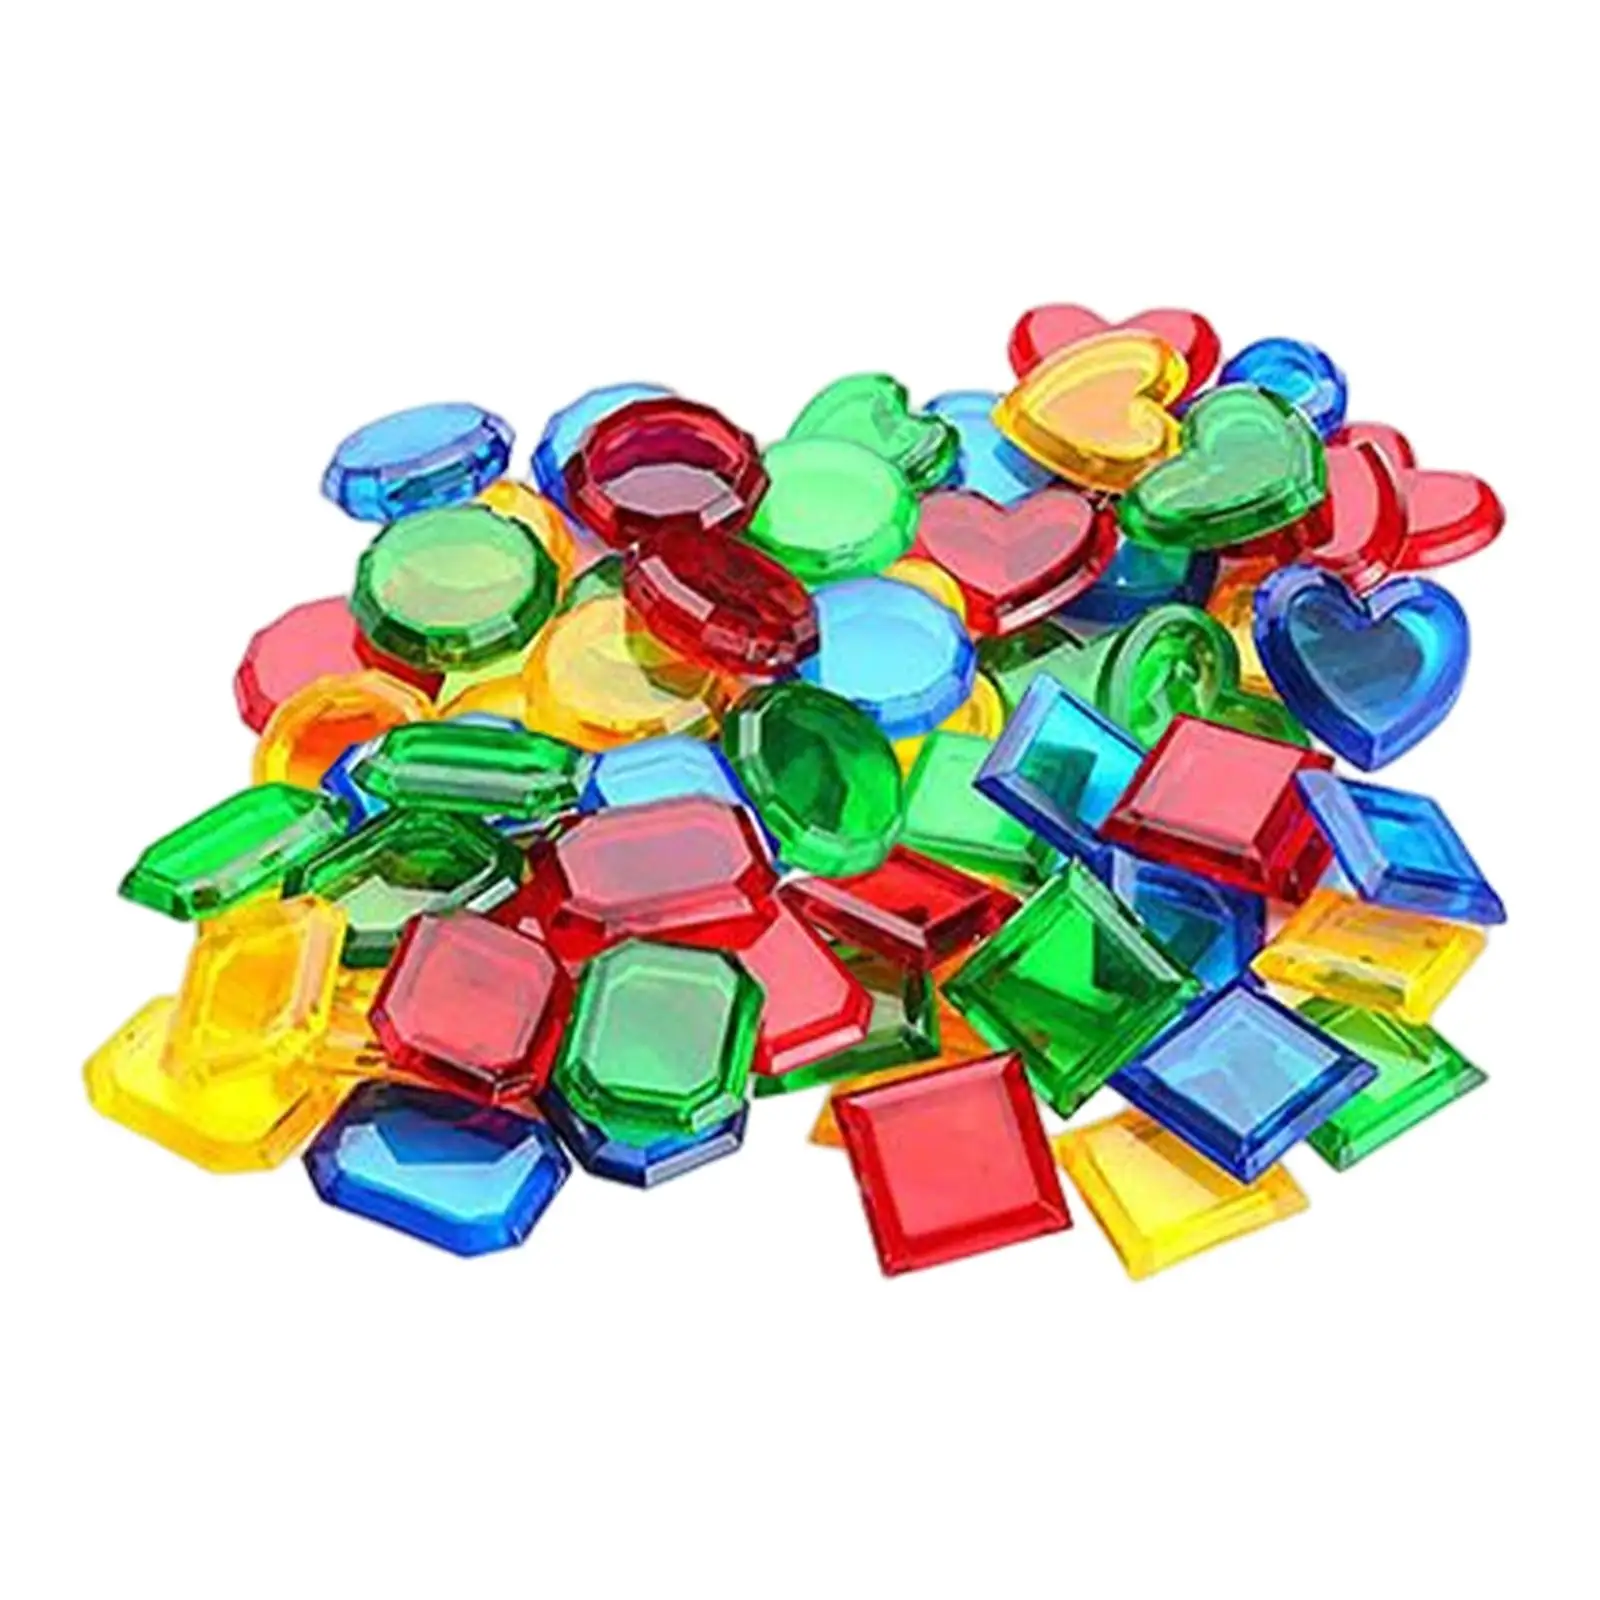 32 Pieces Dive Throw Toy Drop Resistant Motor Skill Game for Beach Adults Kids Girls Boys